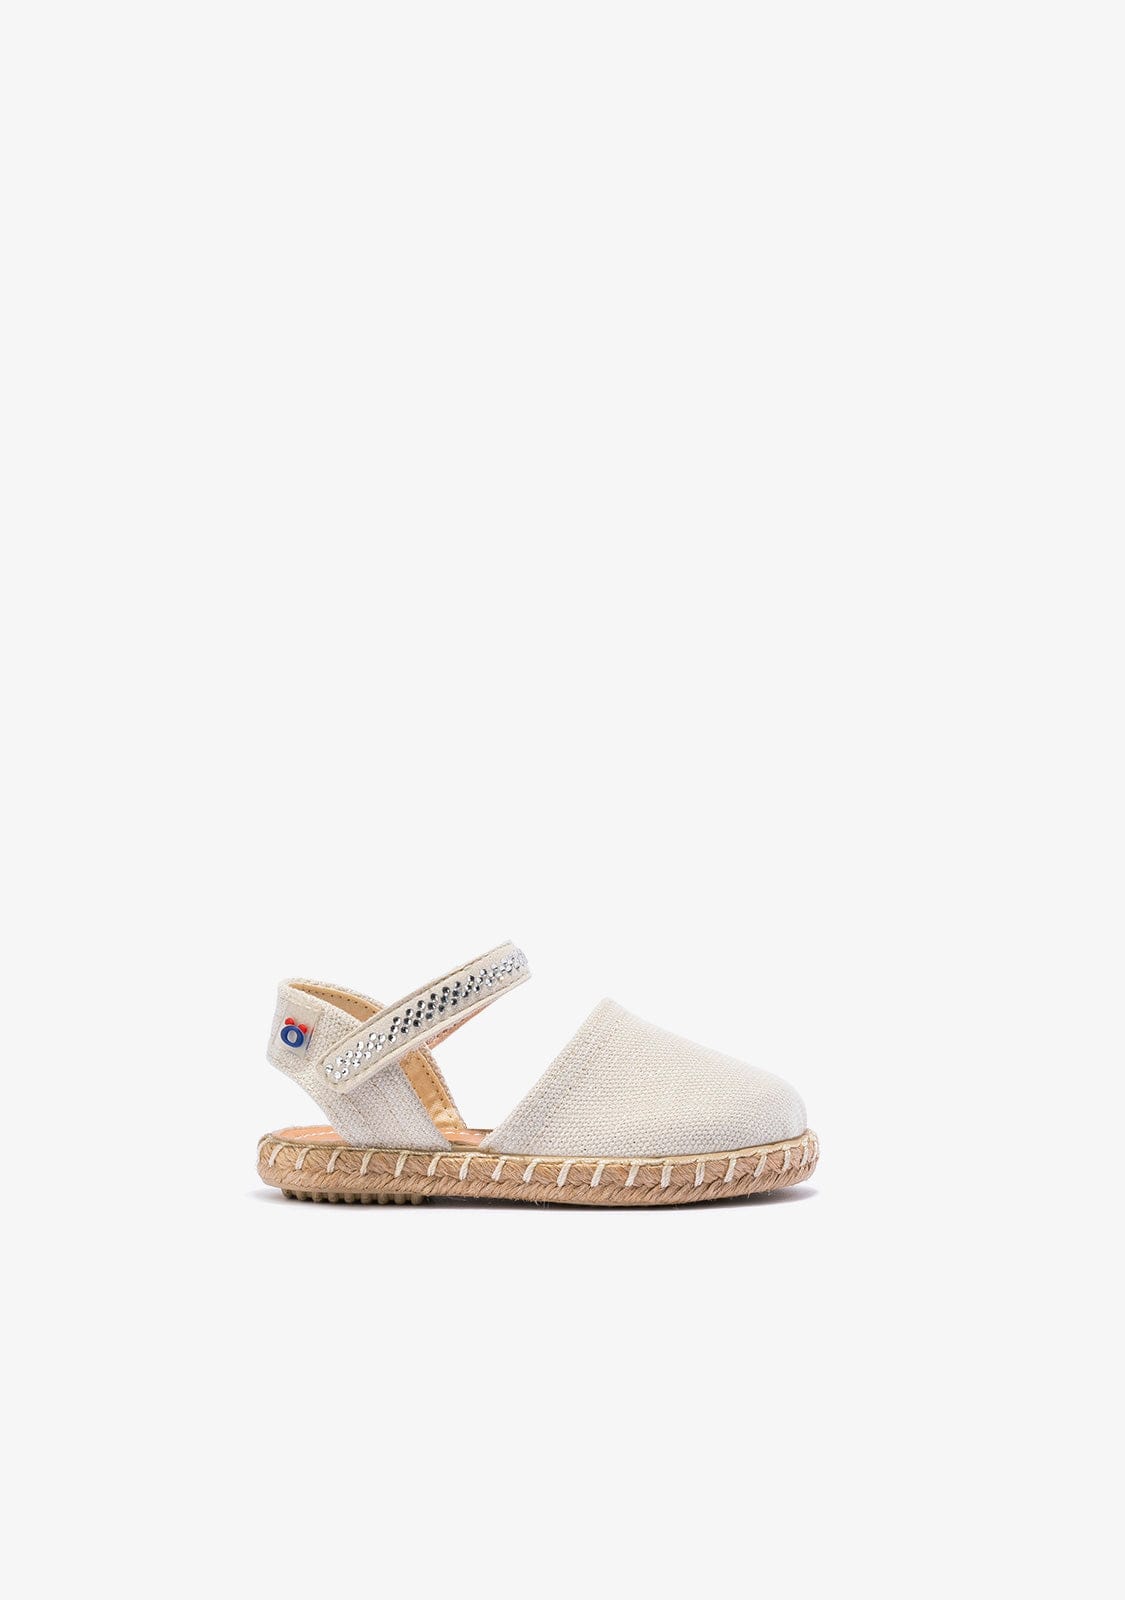 OSITO Shoes Baby's Beige Adherent Strip Espadrilles